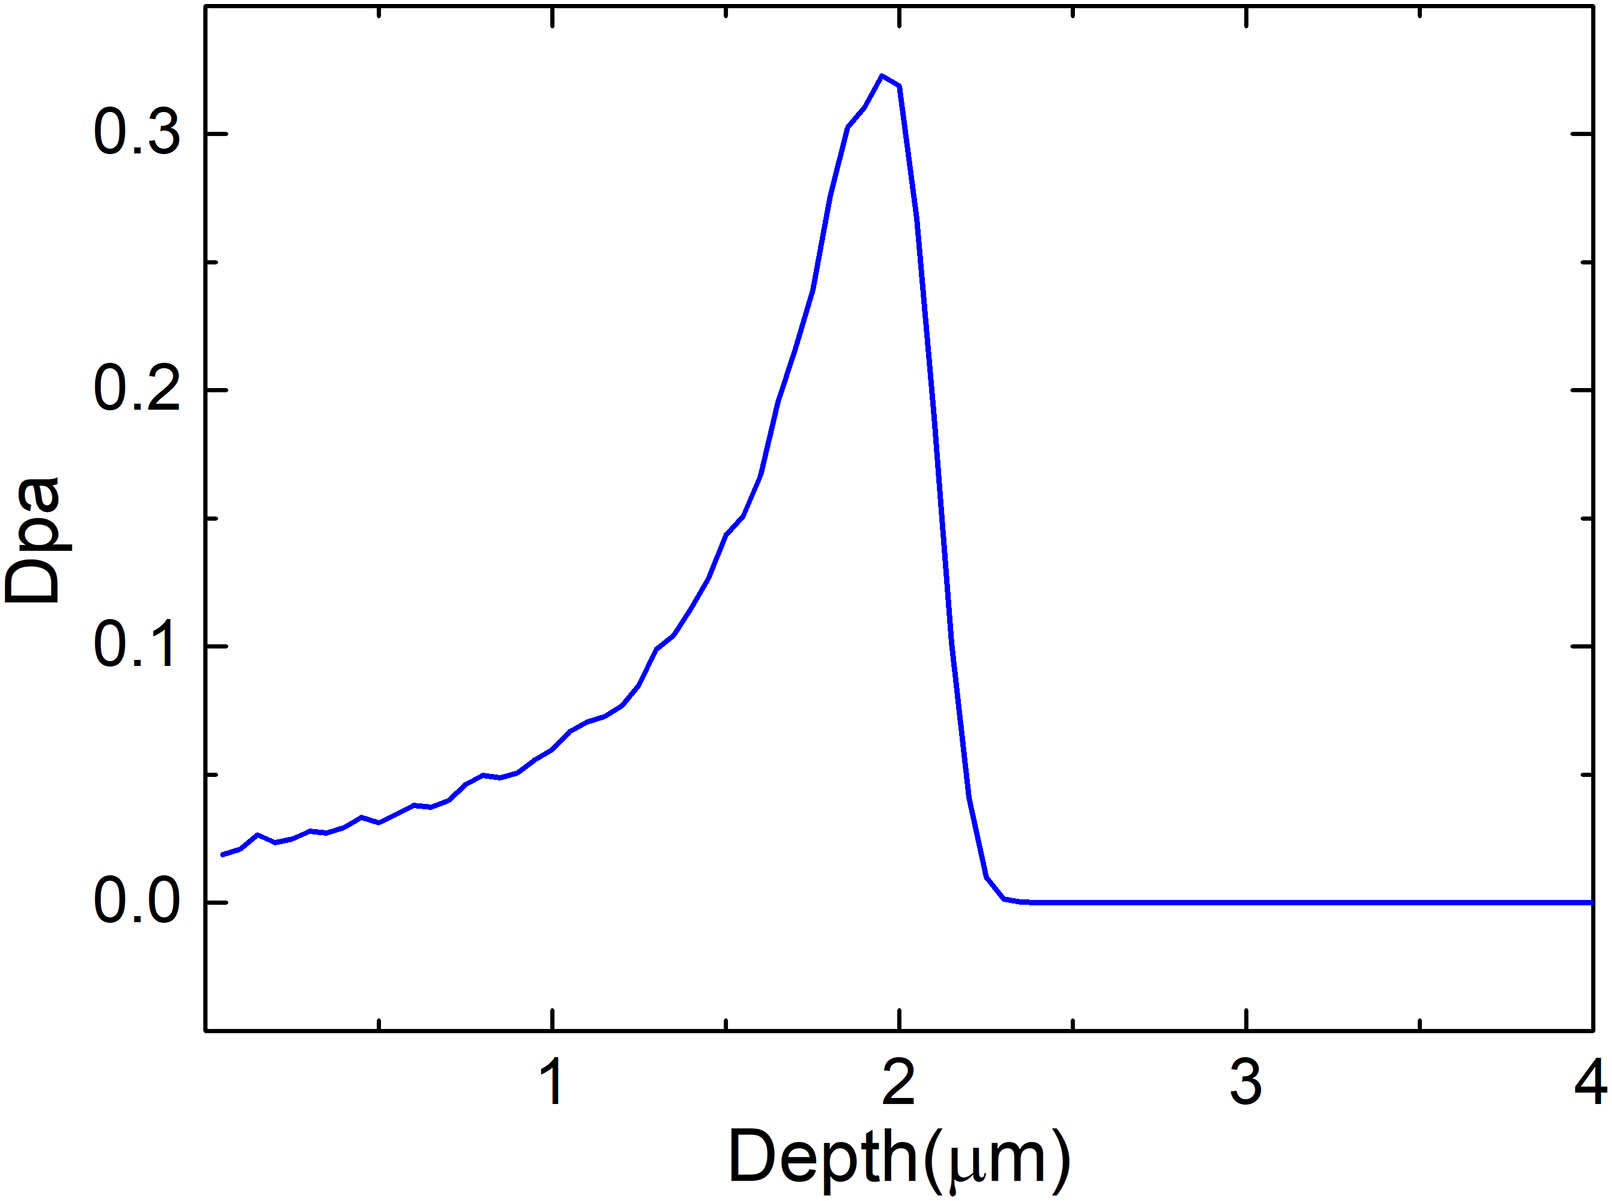 Dpa profile of the 3 MeV O ions with the fluence of 1.5 × 1015 ions/cm2 implanted into LiNbO3 crystal.